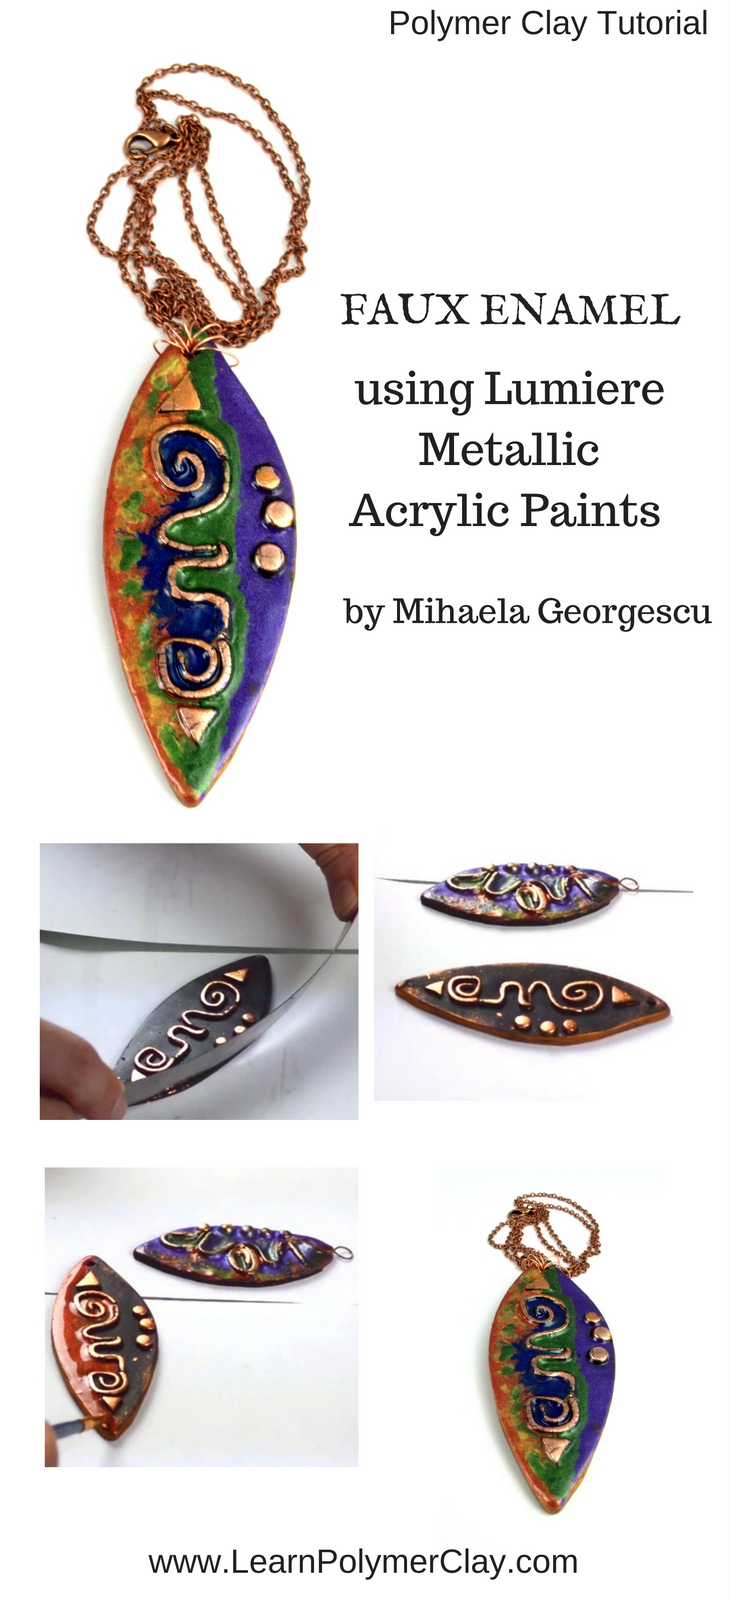 Faux Enamel effect using Lumiere Metallic Acrylic Paints - Polymer clay Video Tutorial